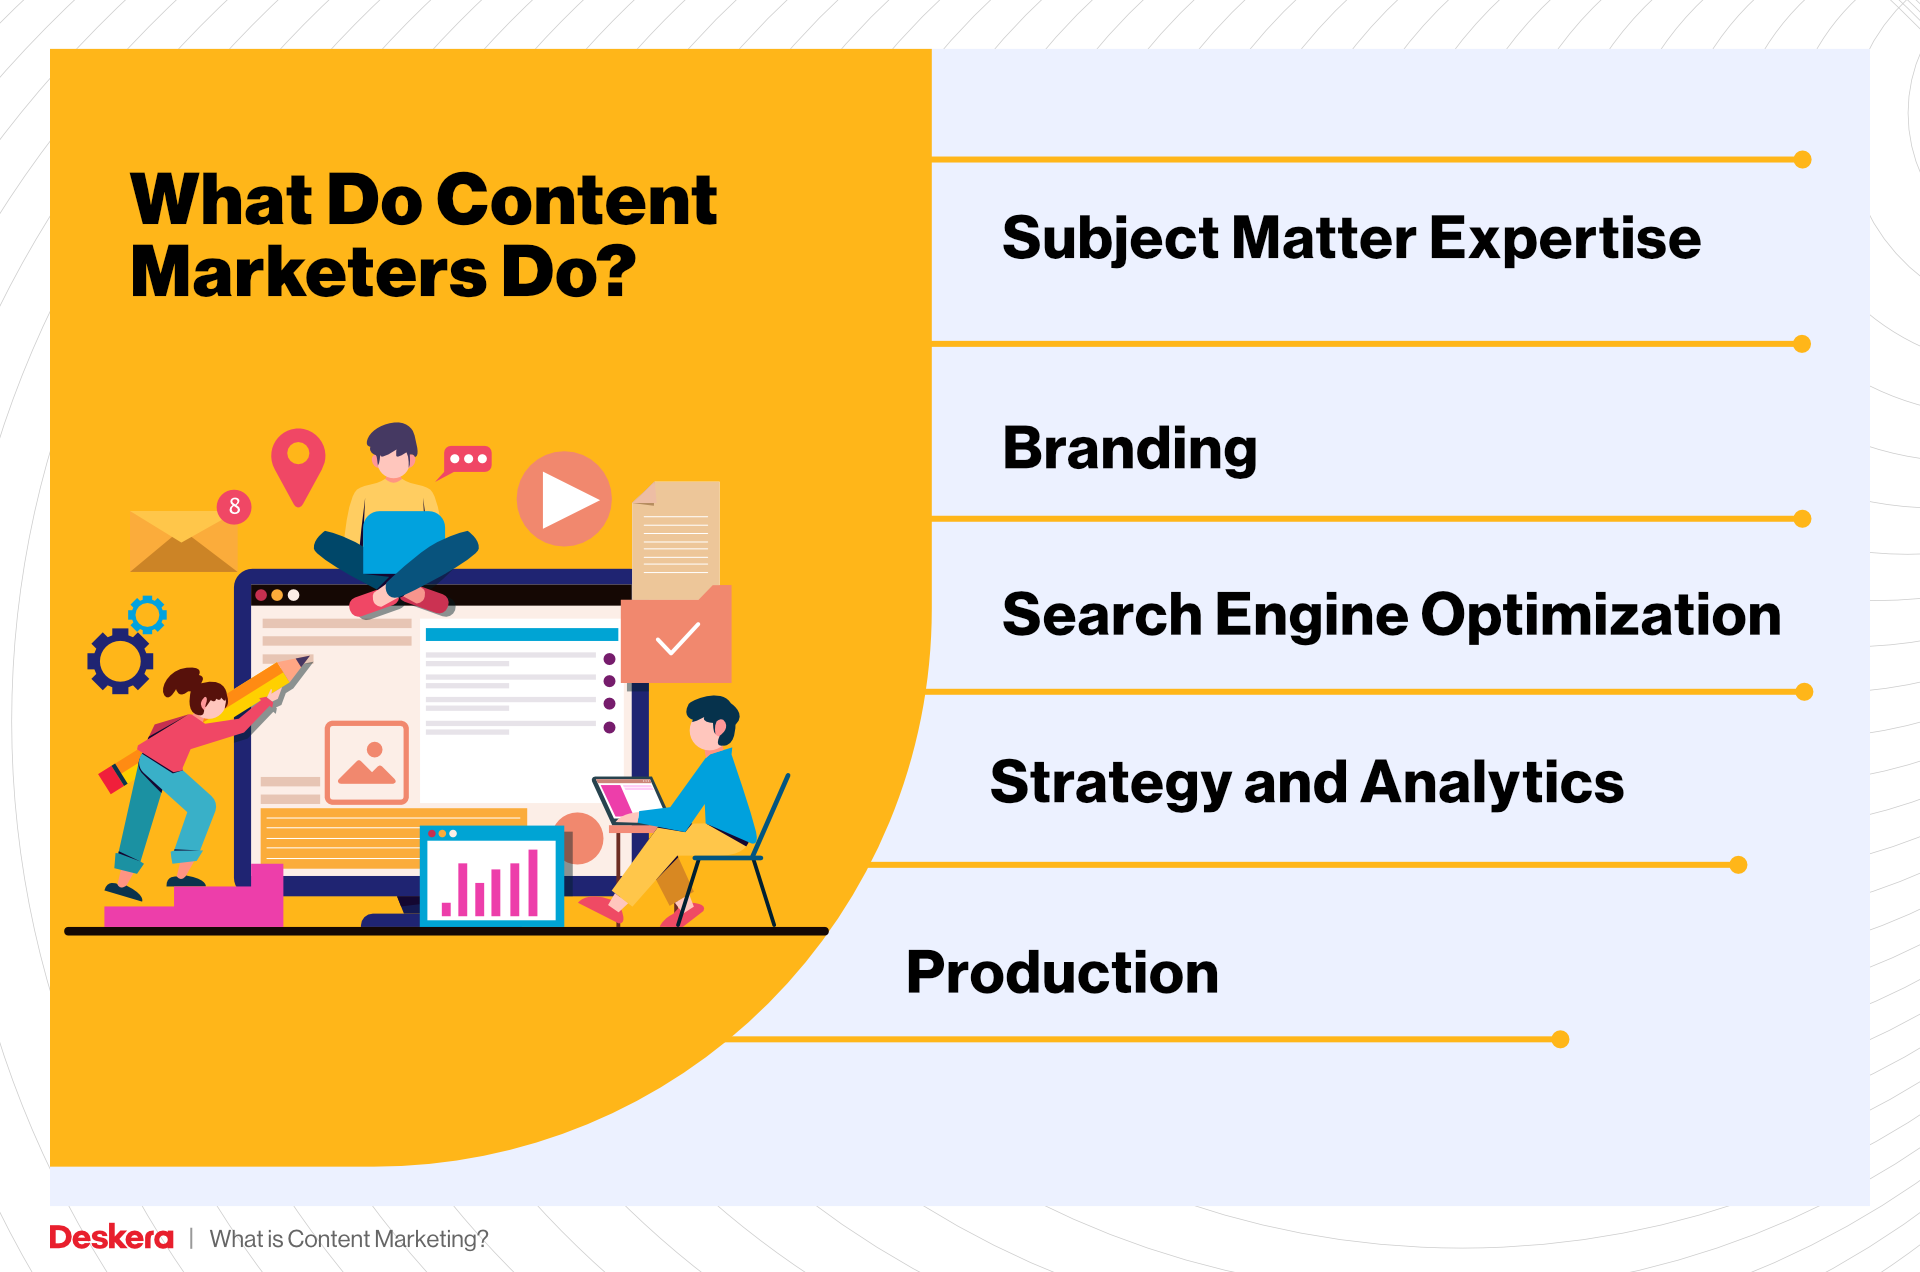 What Do Content Marketers Do?